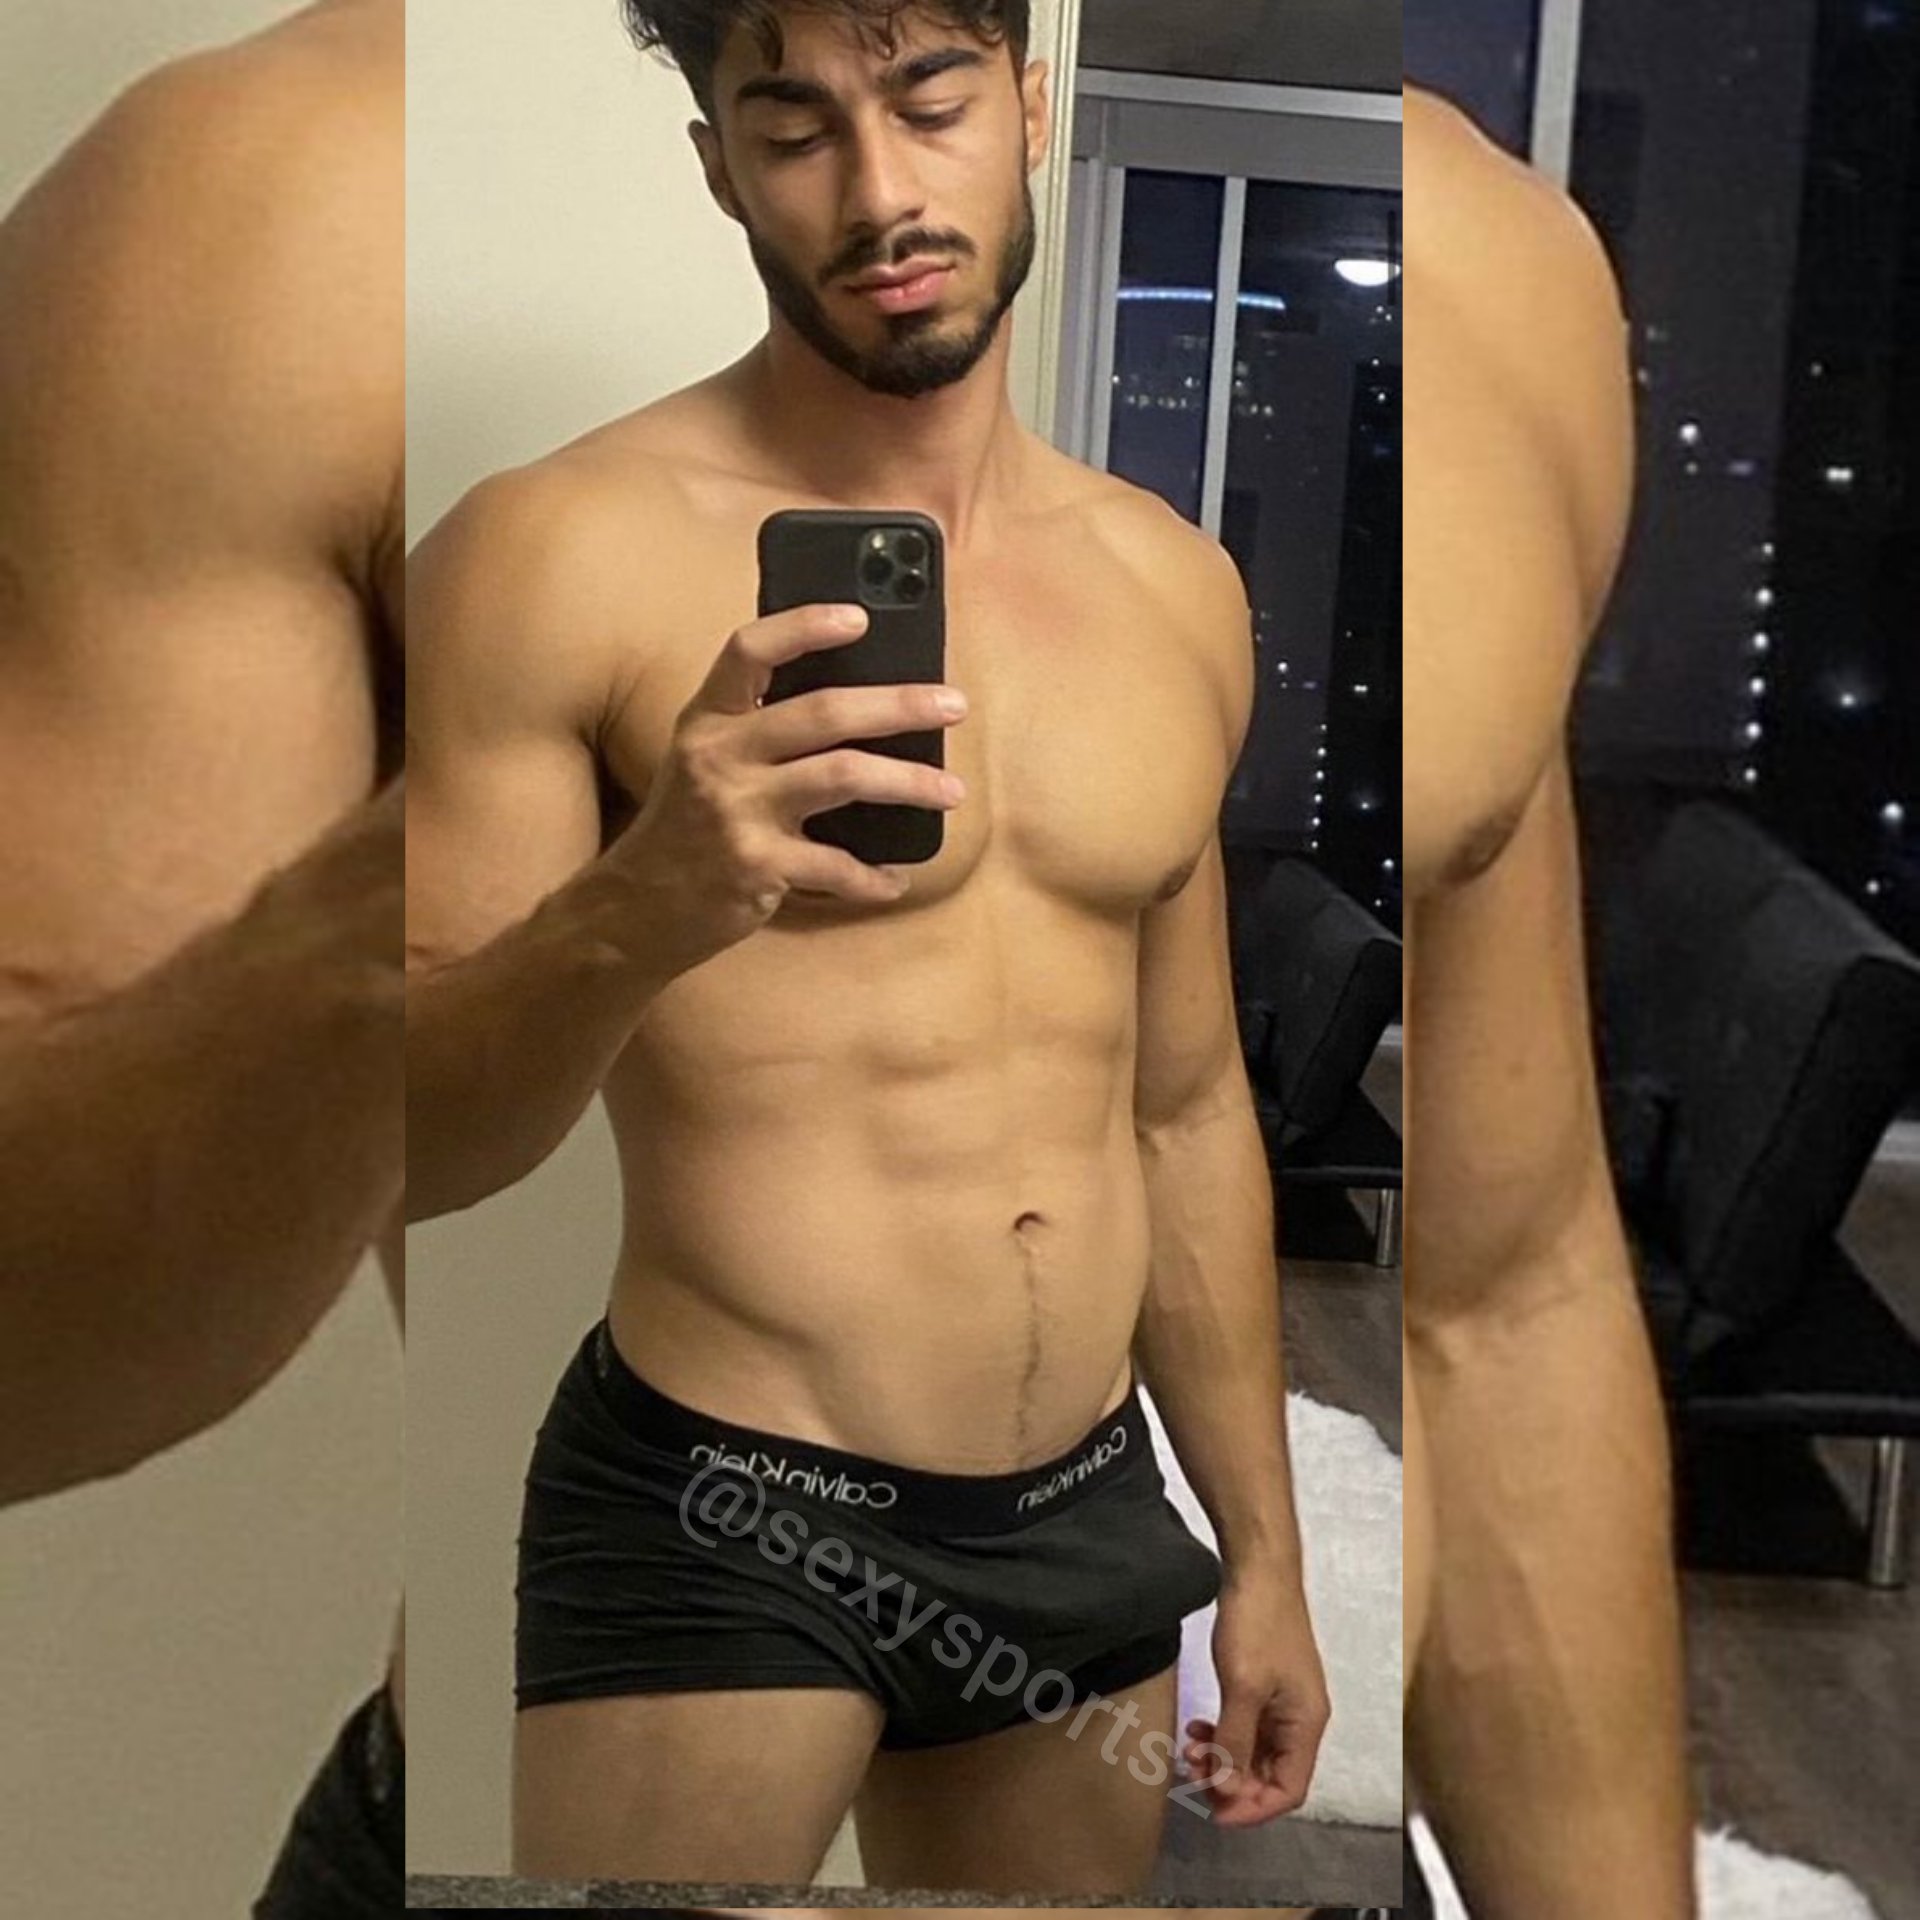 How To Find Someone On Onlyfans By Real Name?